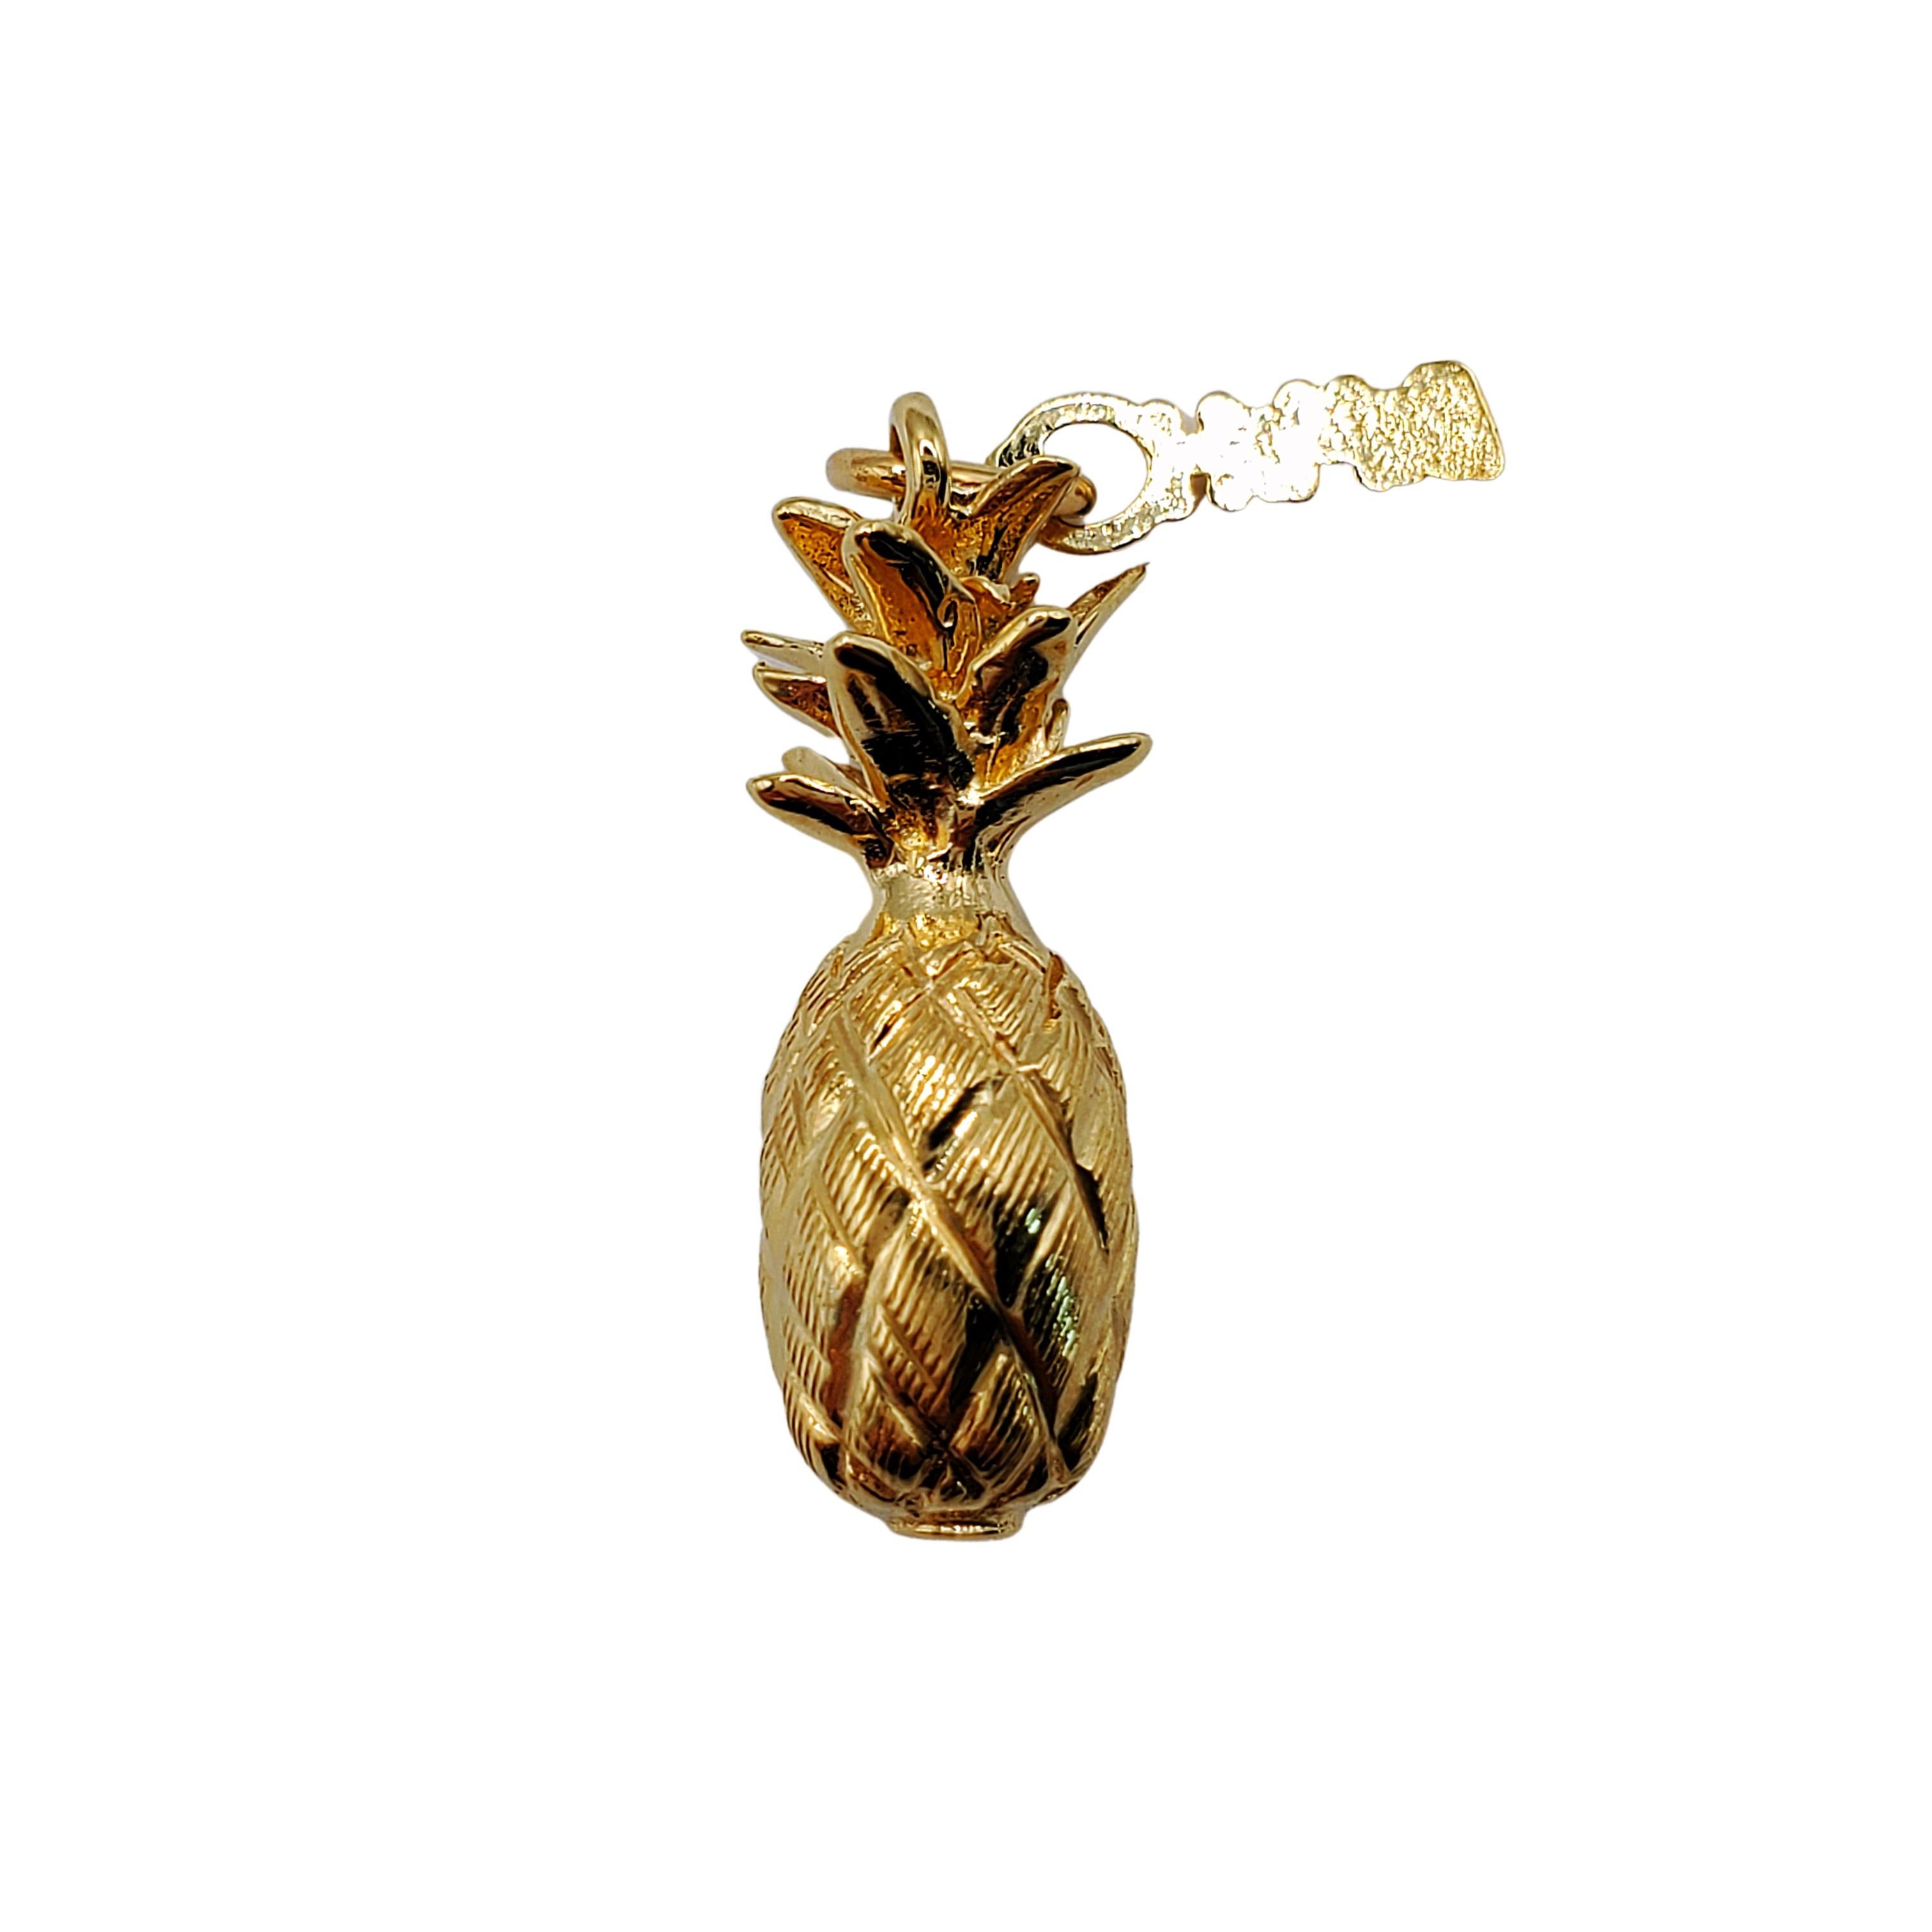 14K Yellow Gold Pineapple Charm

Beautiful 3D 14K yellow gold pineapple charm with wonderful life like detail and also hanging from the charm is a Hawaii tag.
Gorgeous gift for your trip to Hawaii!

Size: 21mm X 8mm

Weight: 3.3 gr / 2.1